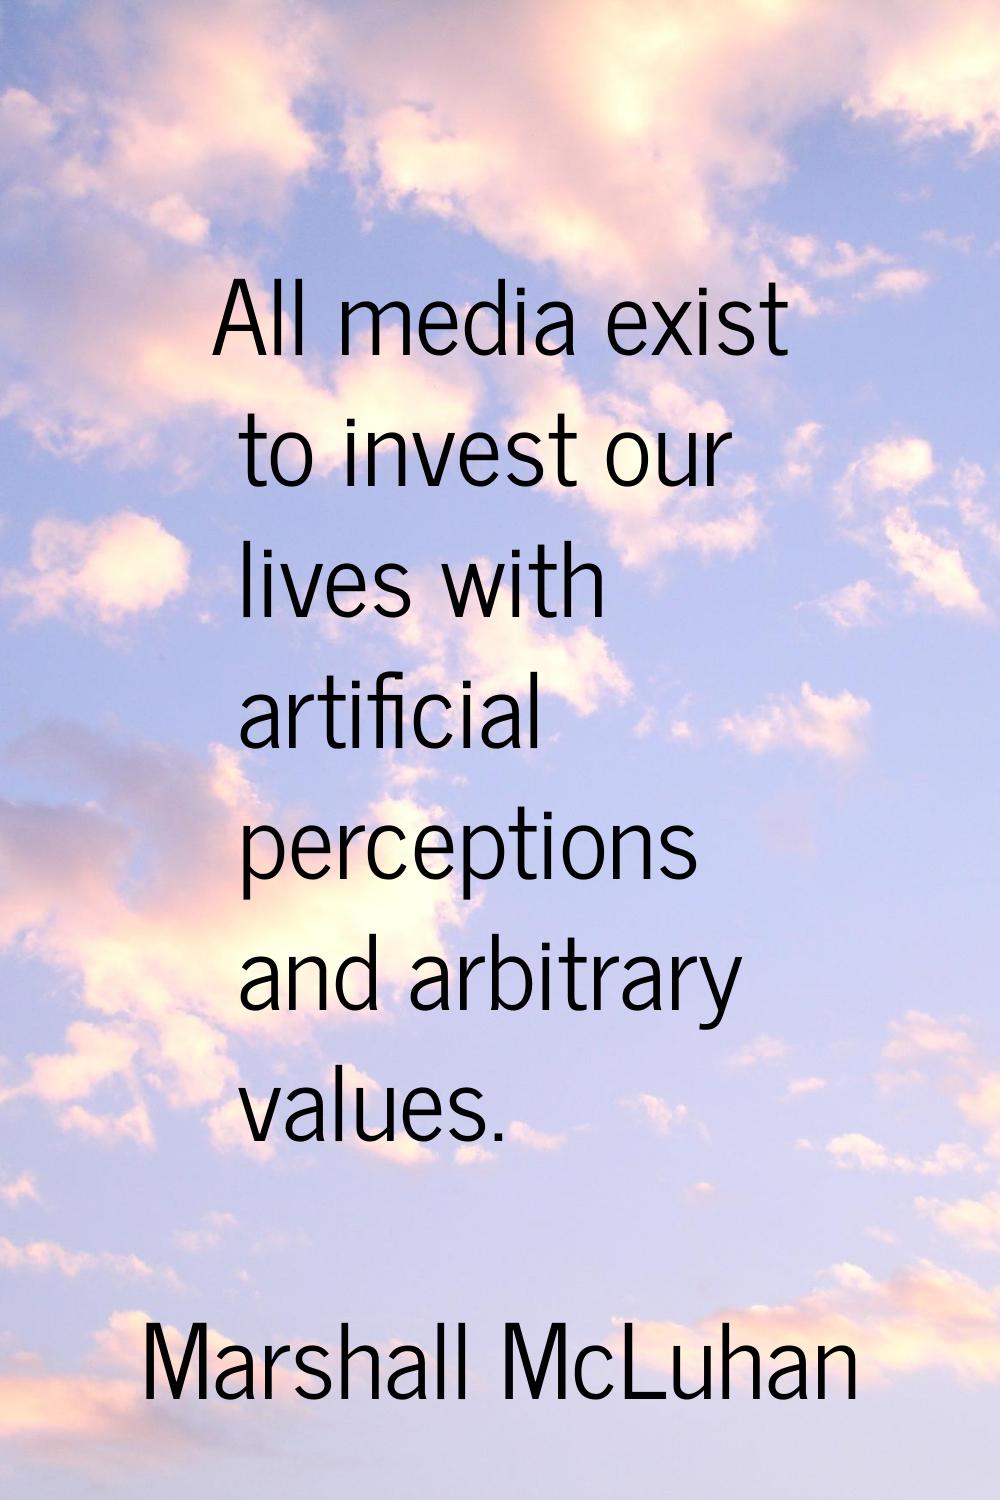 All media exist to invest our lives with artificial perceptions and arbitrary values.